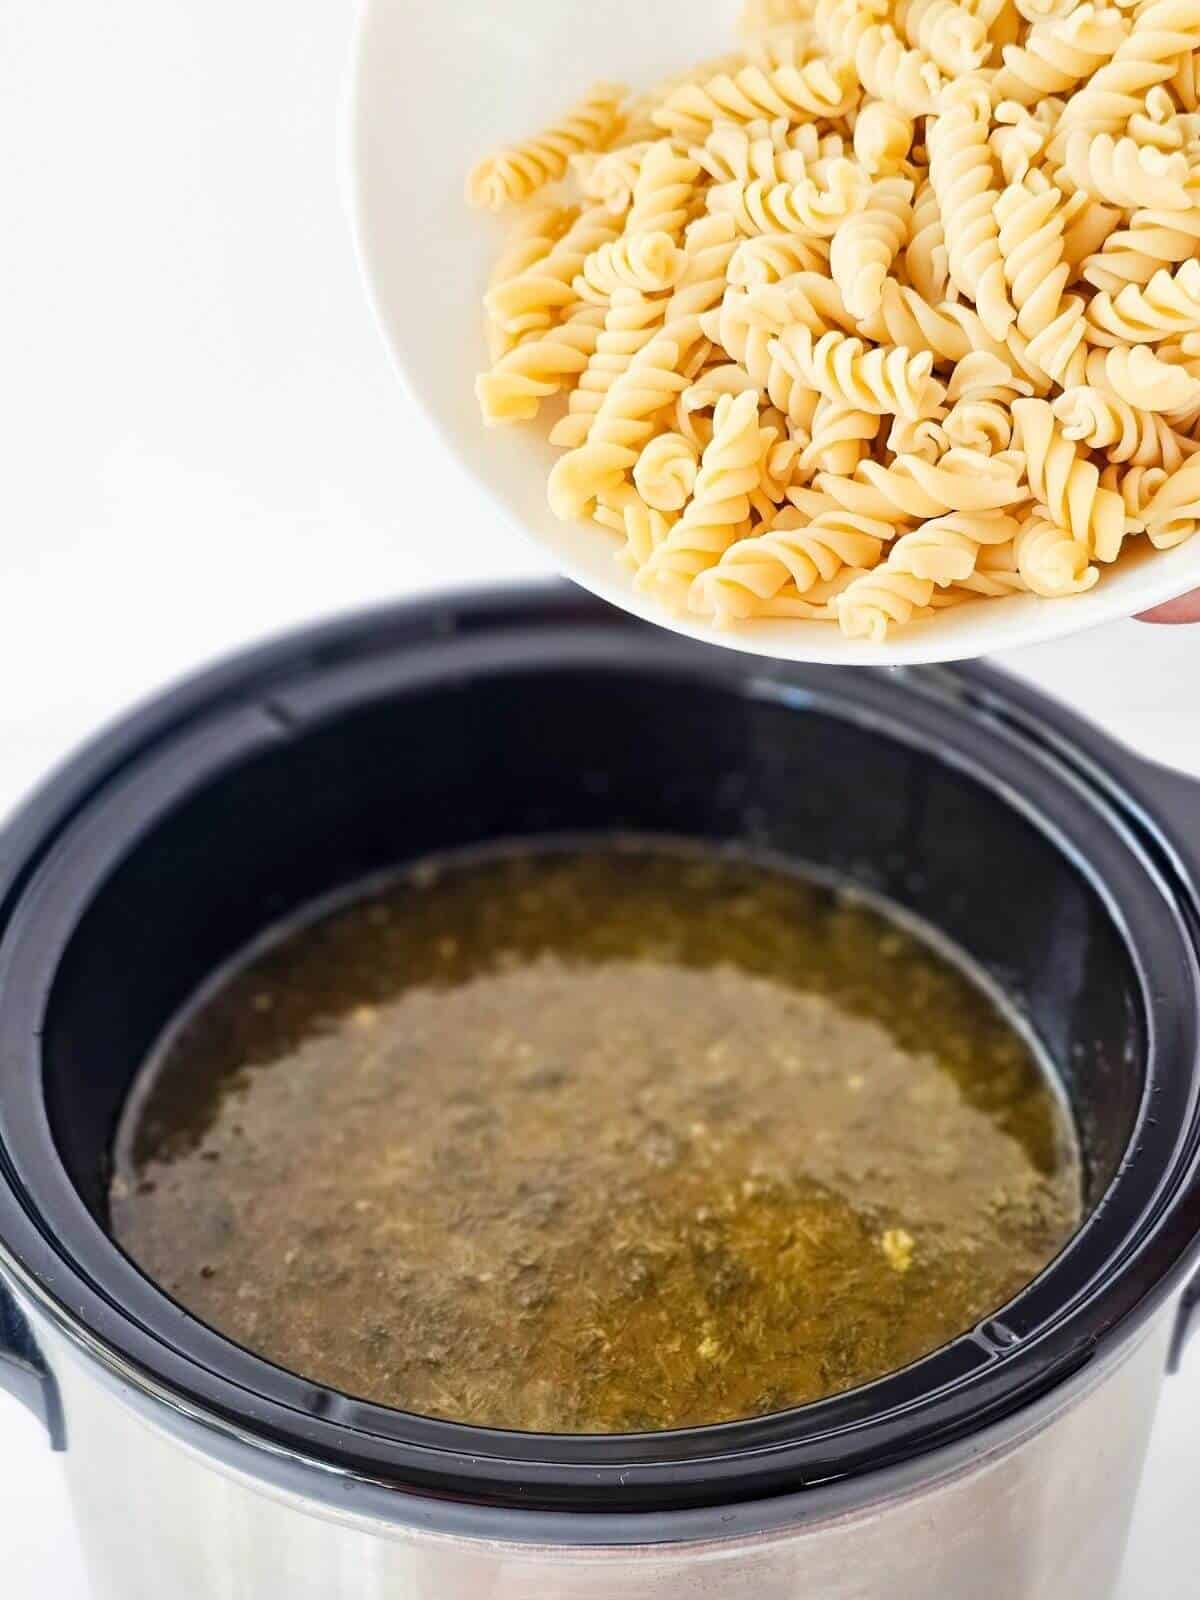 A bowl of cooked rotini pasta being poured into a slow cooker full of soup.